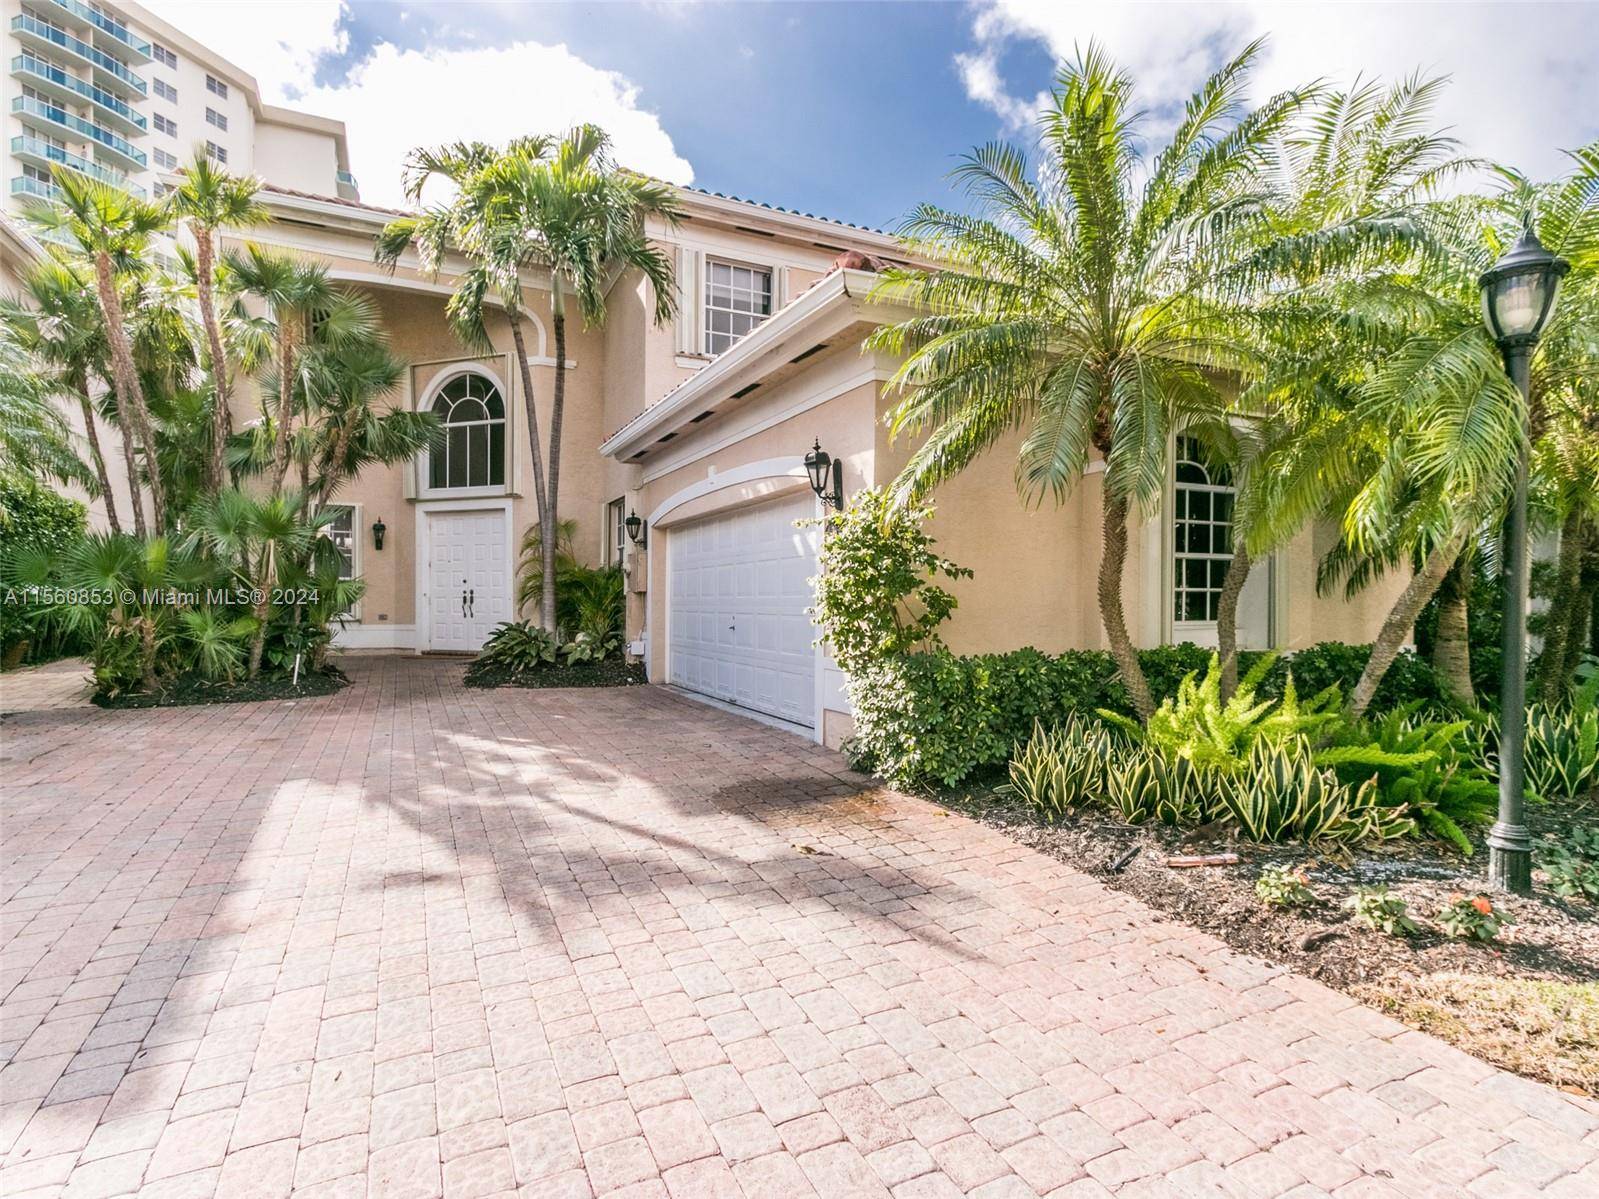 Available For Rent 9, 300 per Month Private Single Family Pool Home is Situated between Golden Beach and Sunny Isles in a Guard Gated Community with 24 7 Manned Security.